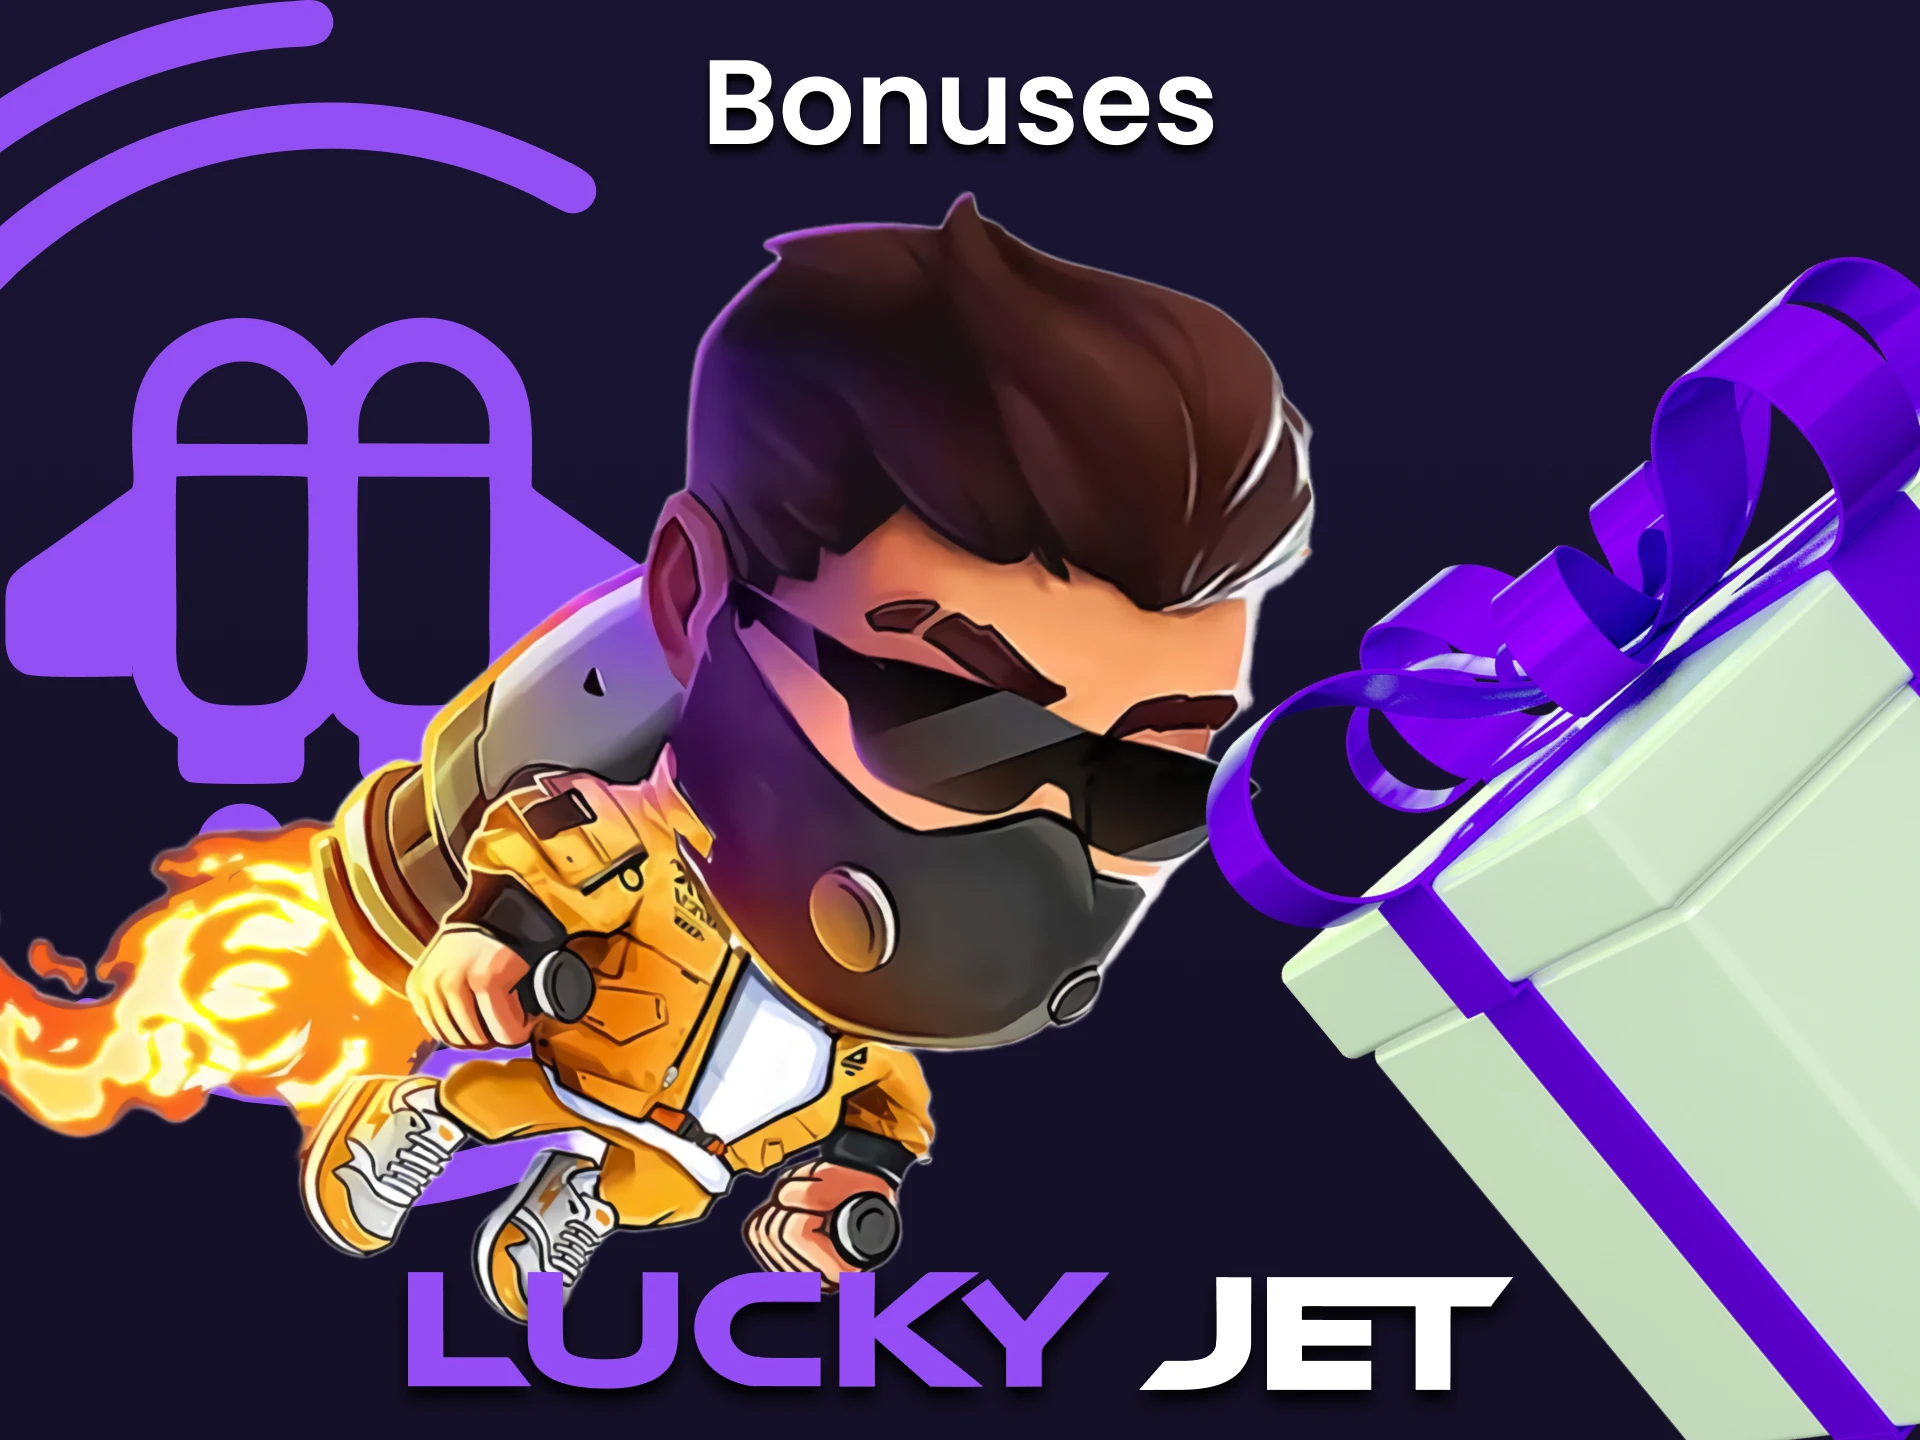 Find out what bonus you will get from the promotional code in the Lucky Jet game.